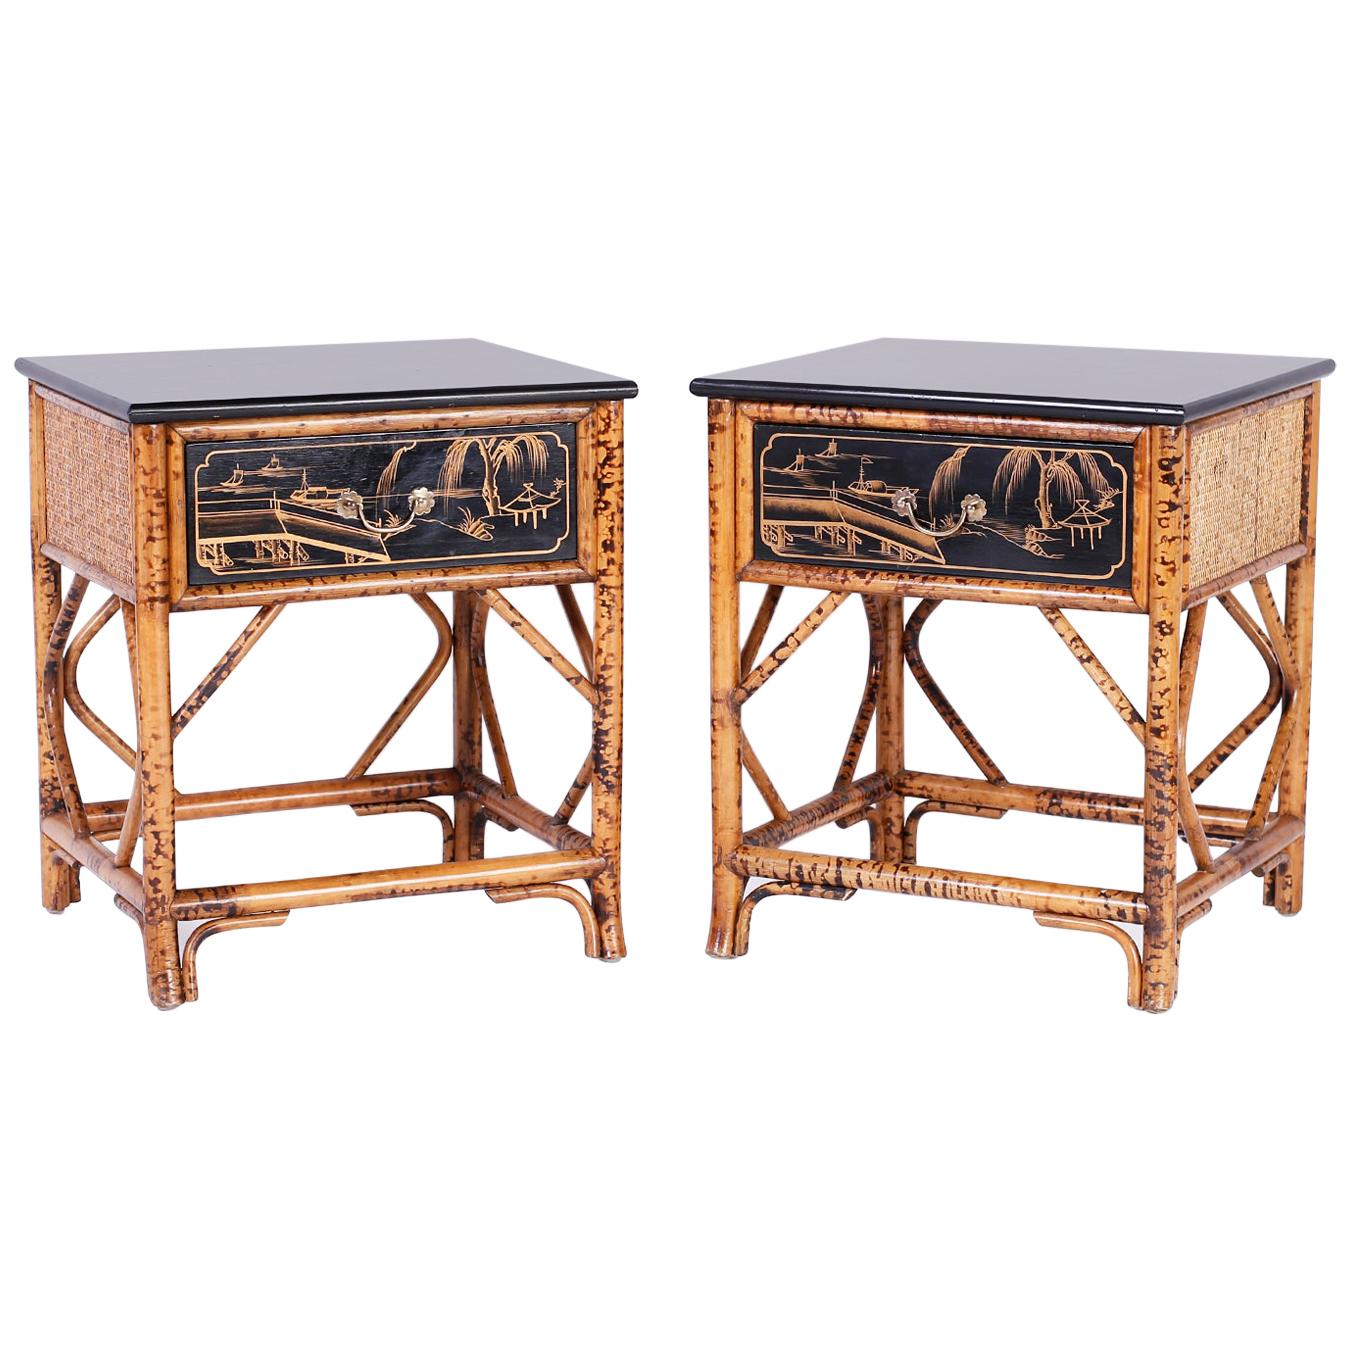 Pair of Bamboo and Lacquer Stands or Tables